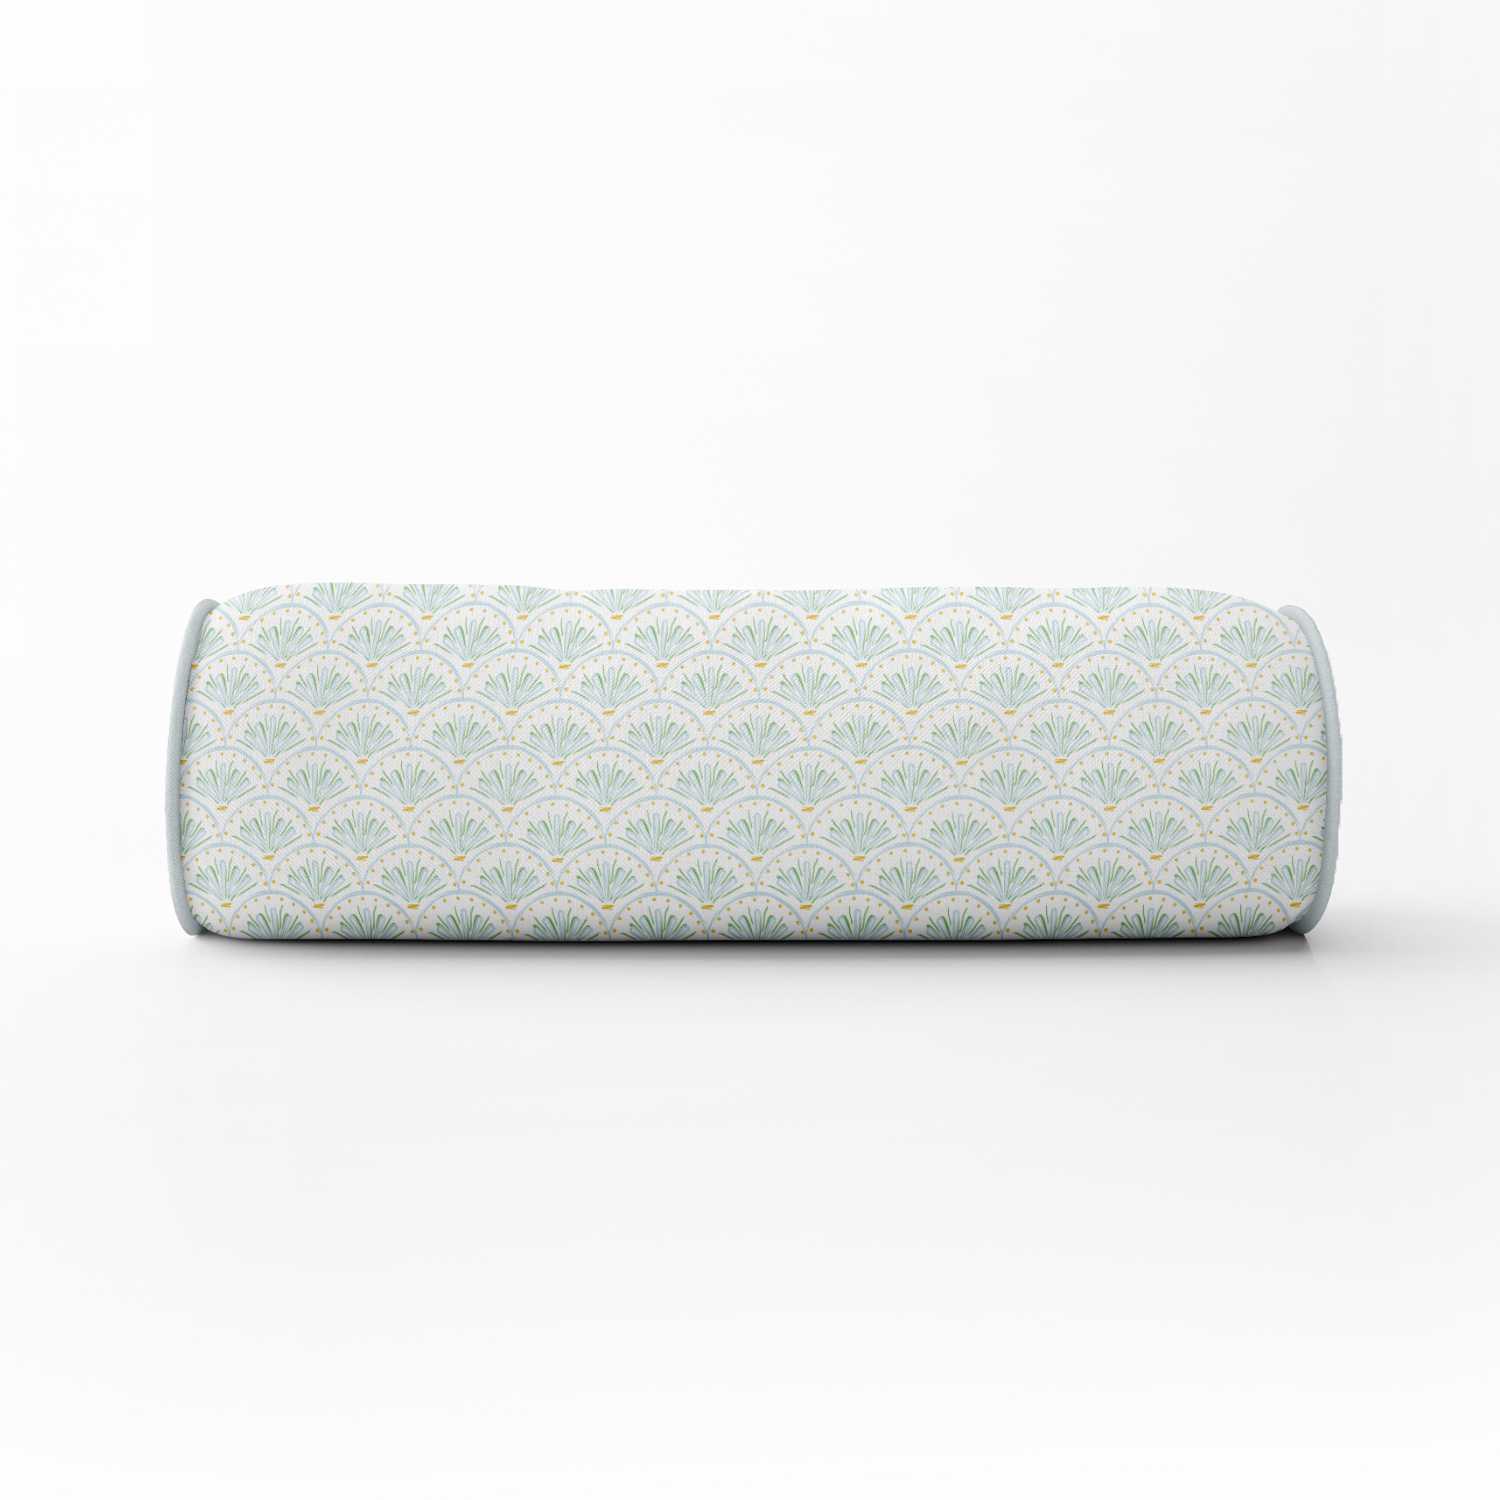 small-scale-green-flower-bolster-blue-piping-258236.jpg